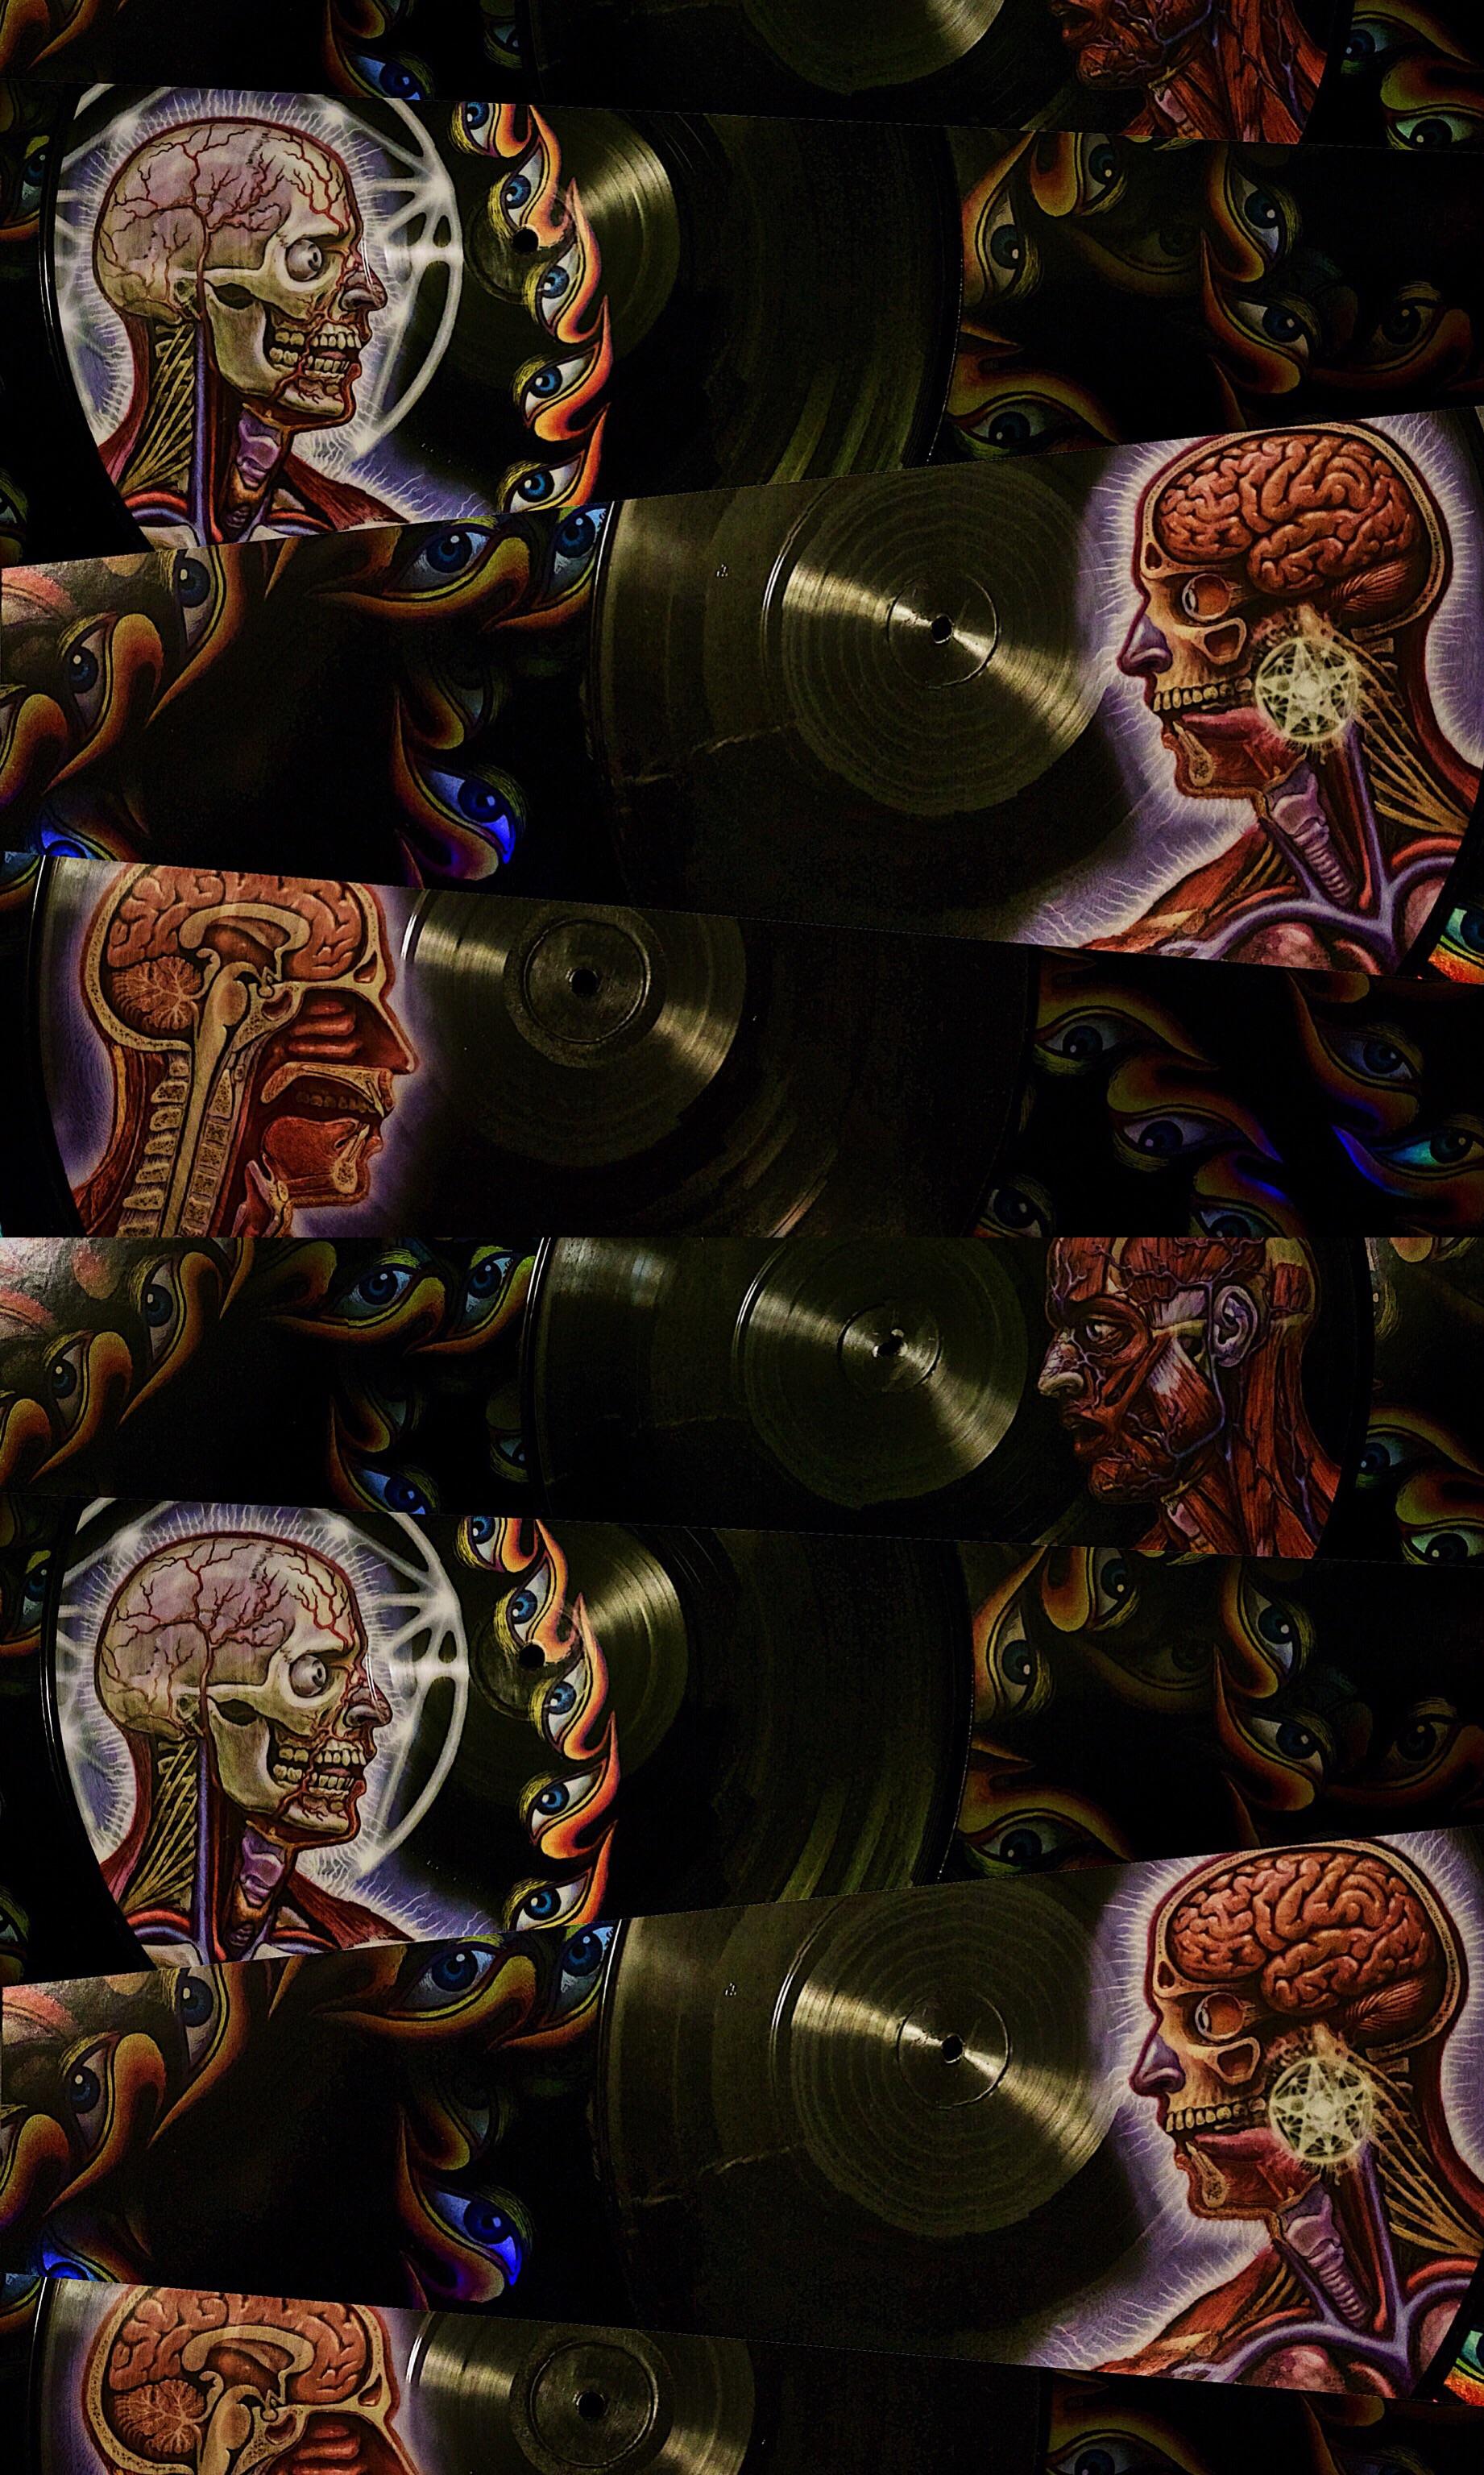 Ordered the lateralus vinyl, made a phone wallpaper of the records